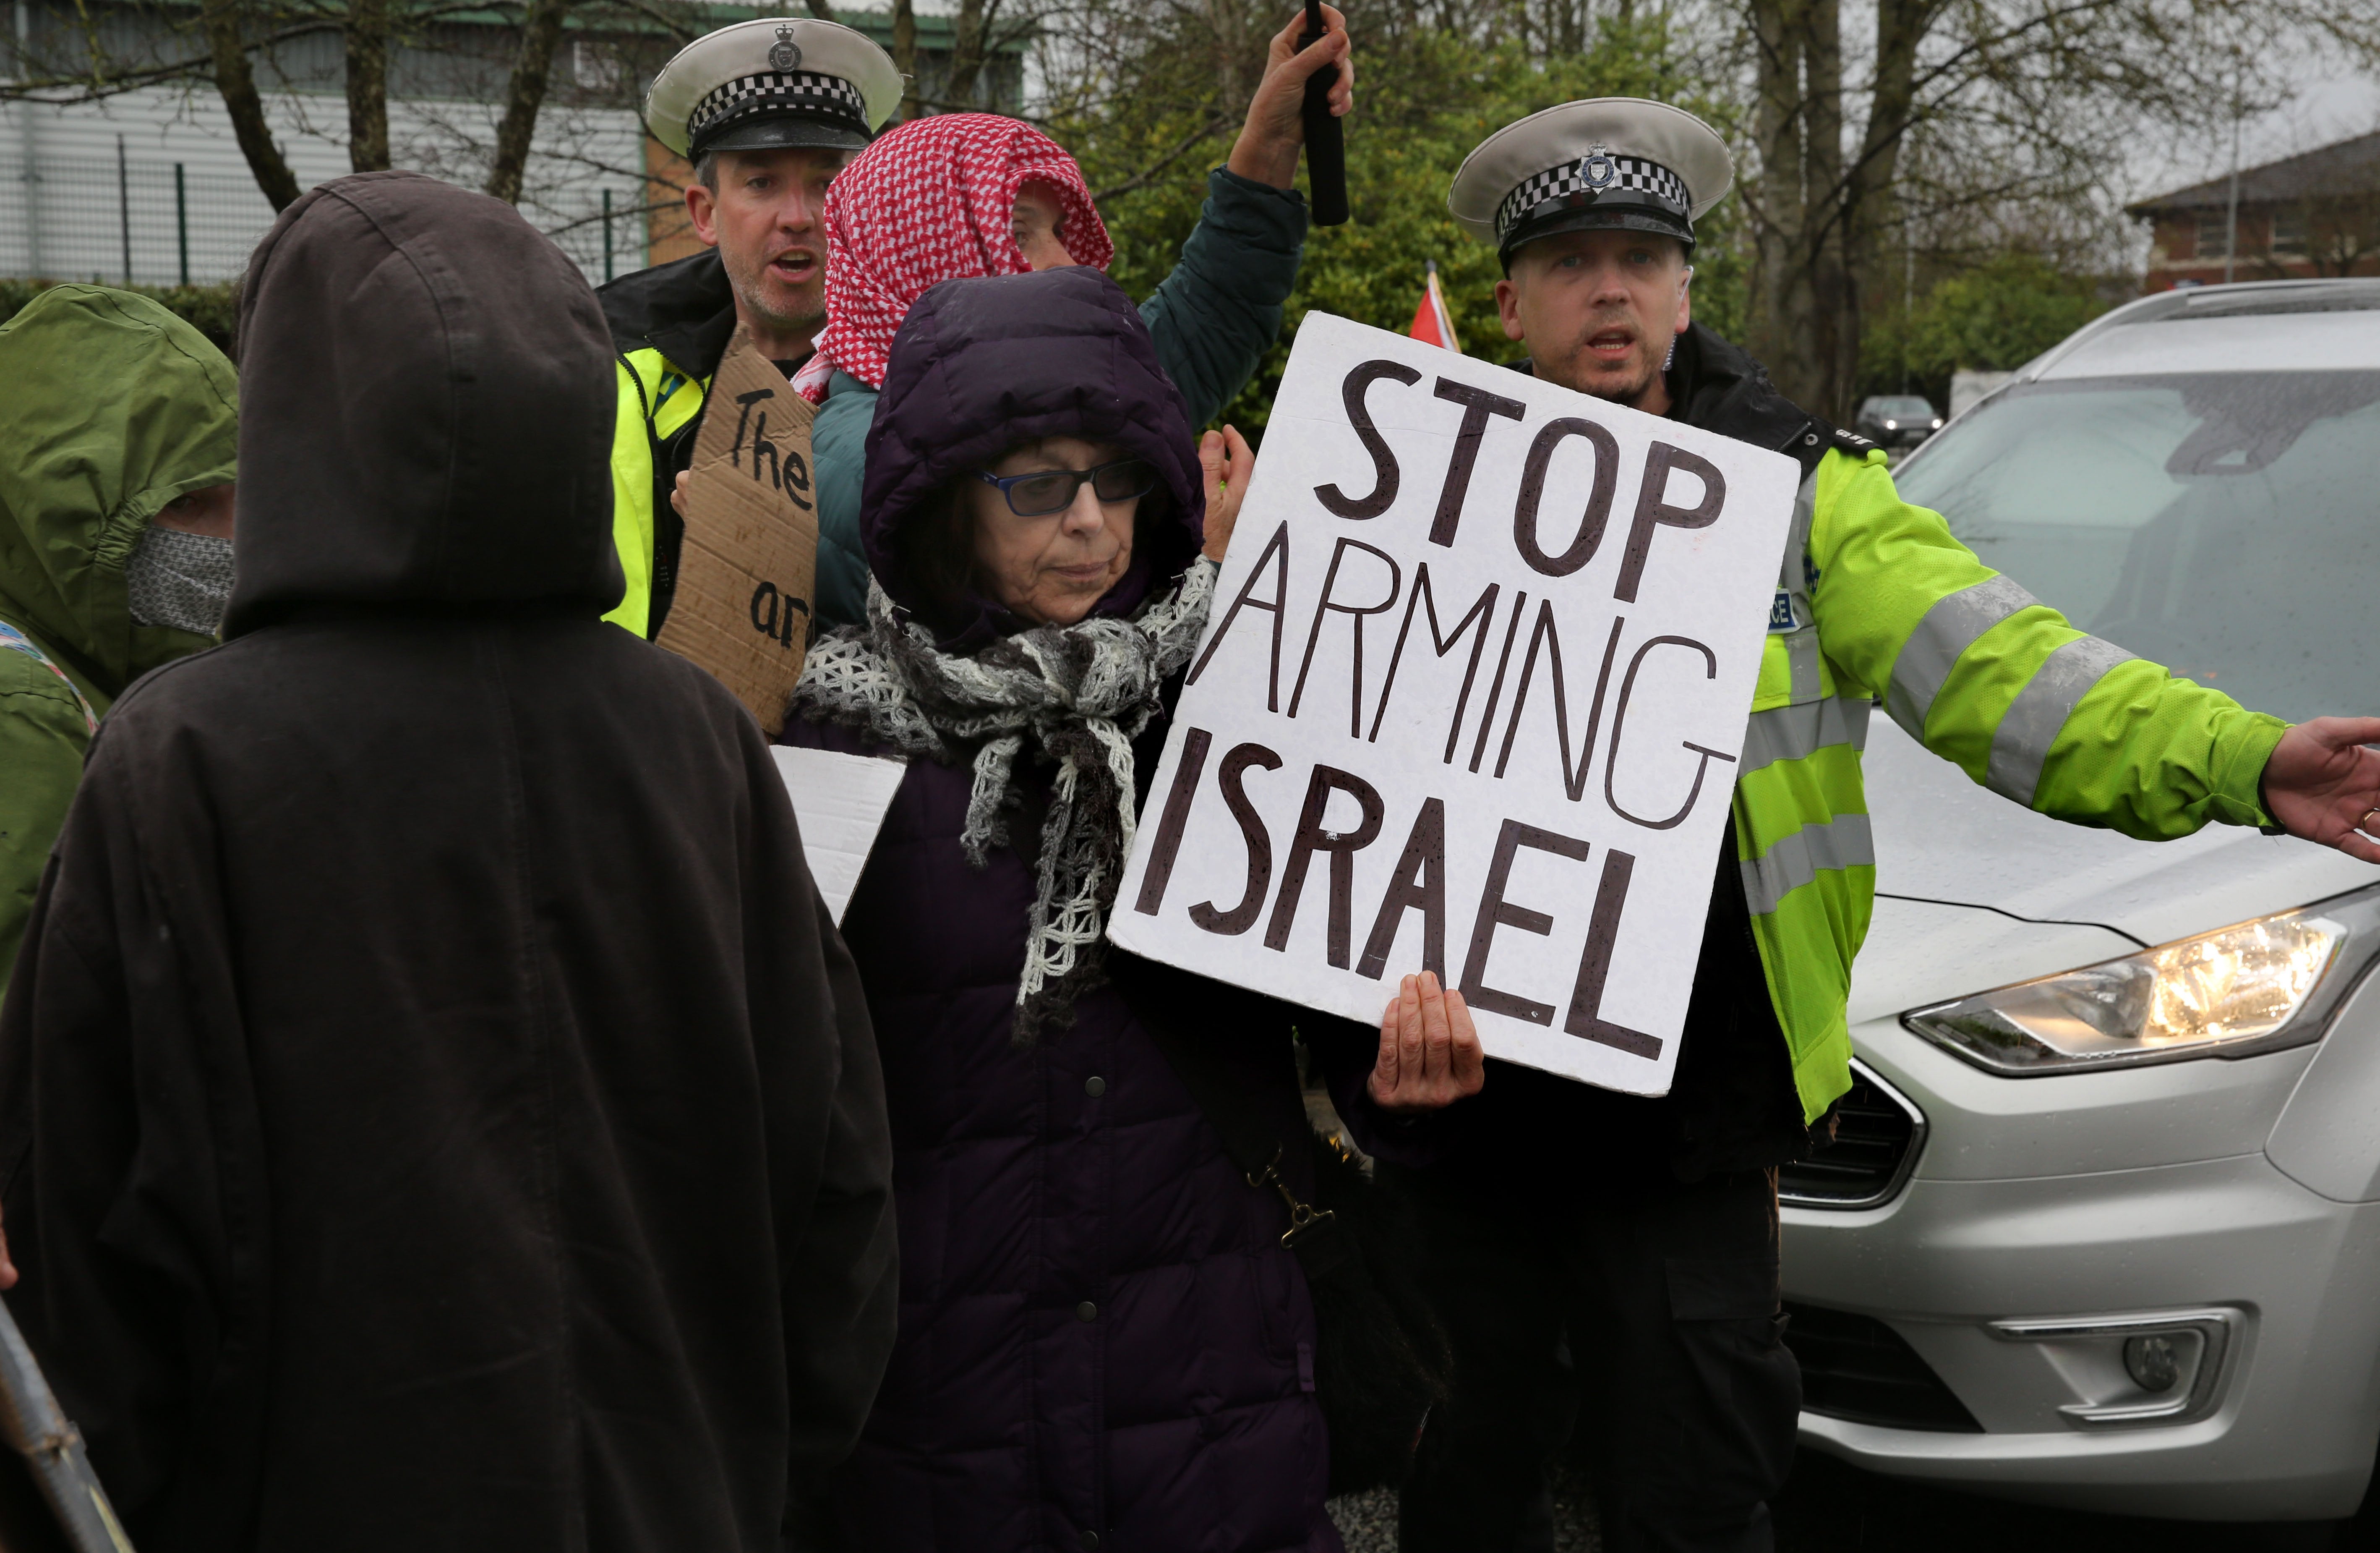 Protests outside Elbit Systems’ factory in Leicester on 20 March